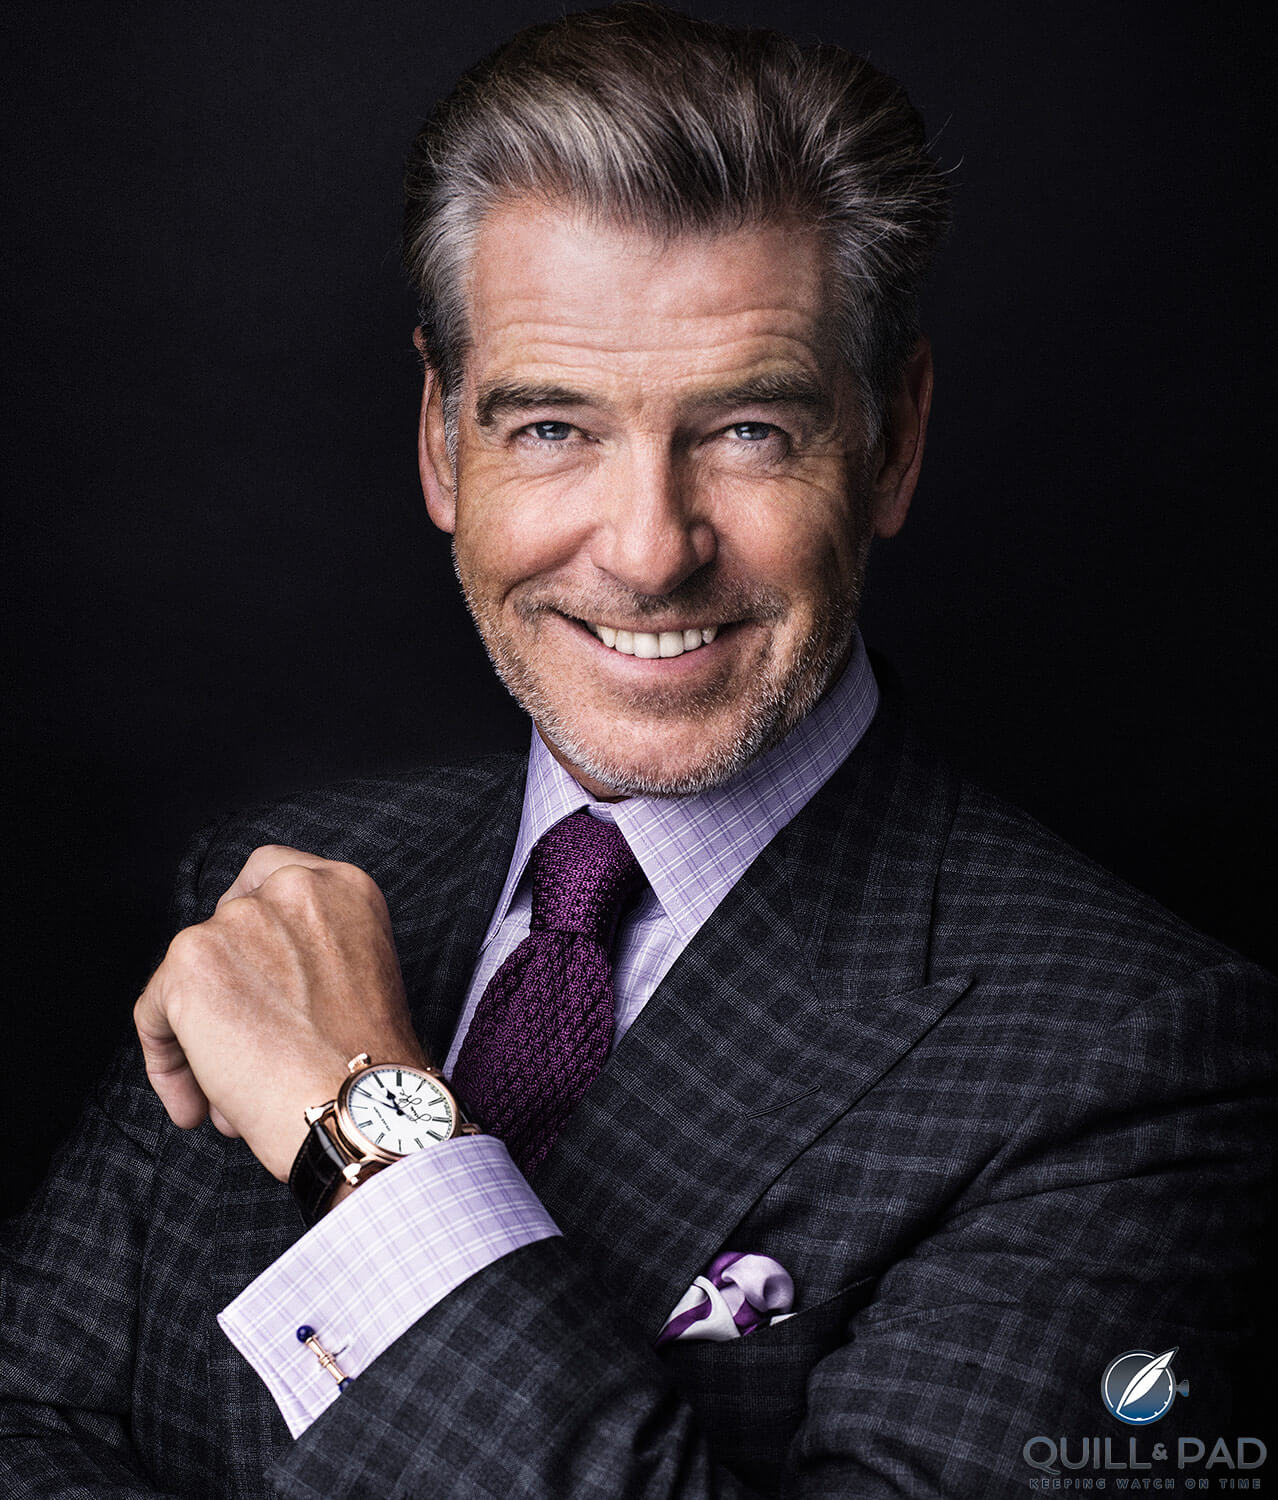 Pierce Brosnan modeling the Speake-Marin Resilience Love Life for Only Watch